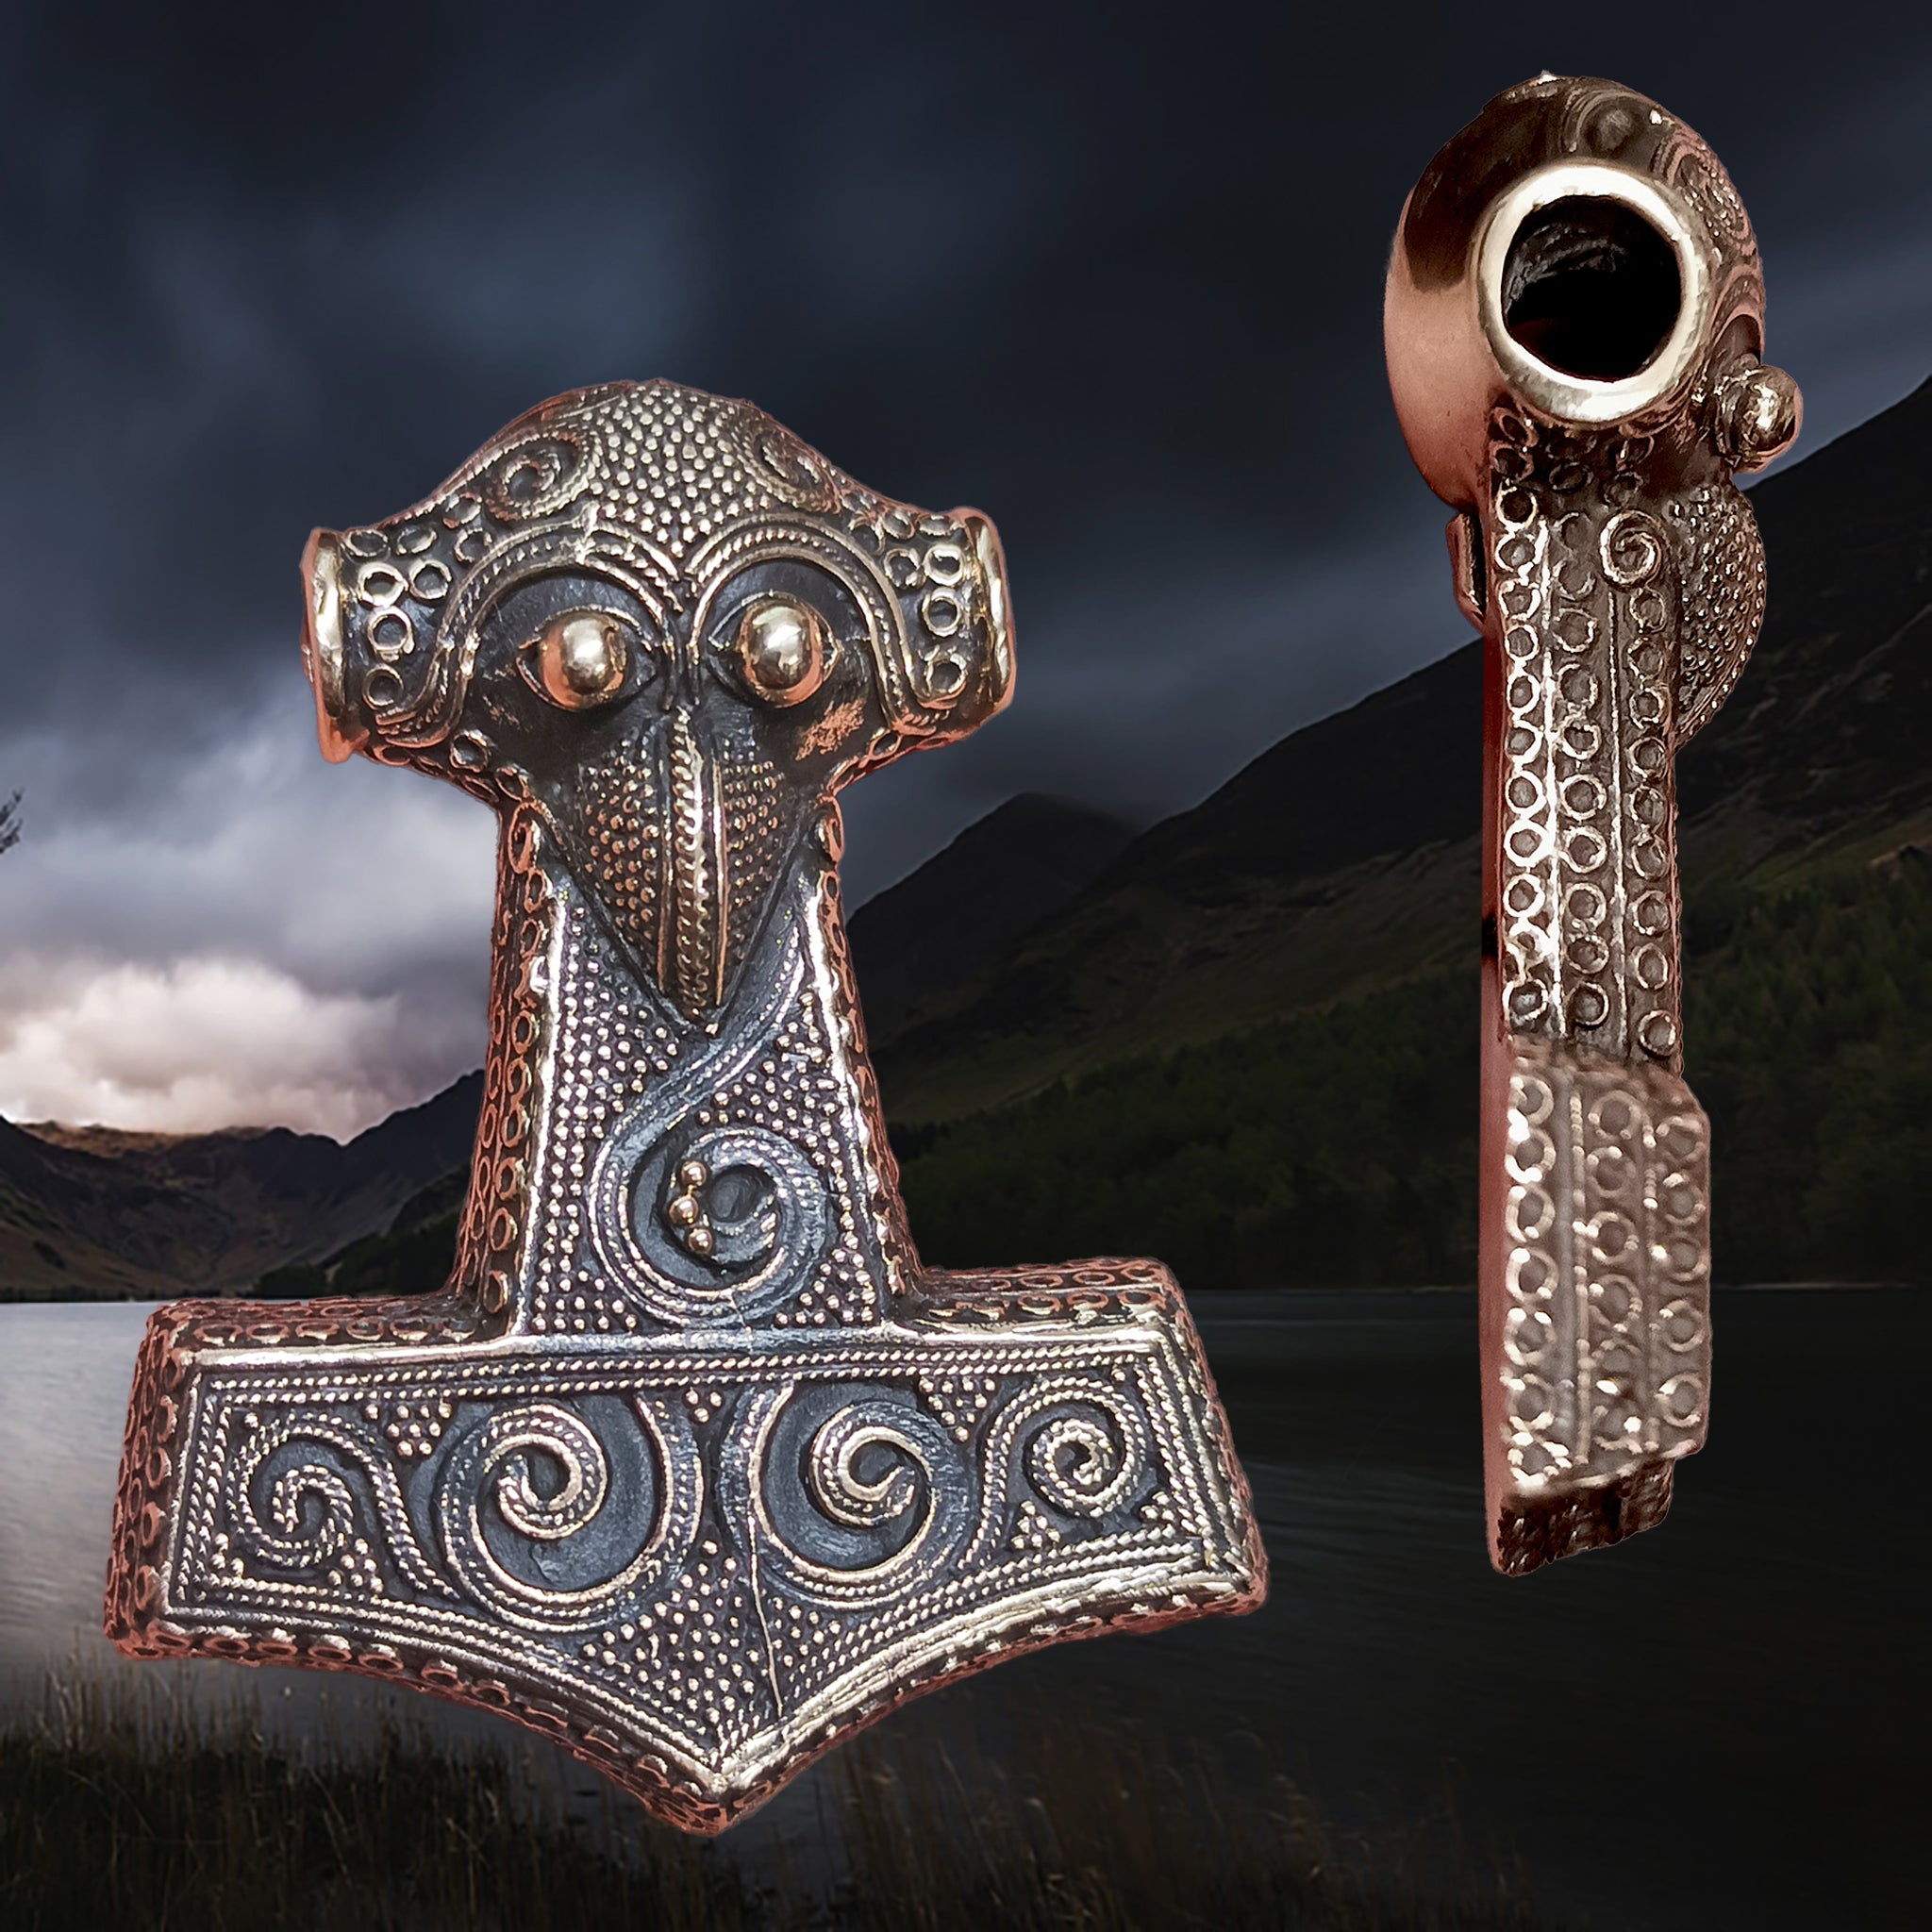 Large Bronze Filigree Thors Hammer Pendant Replica from Kabara - Front and Side View